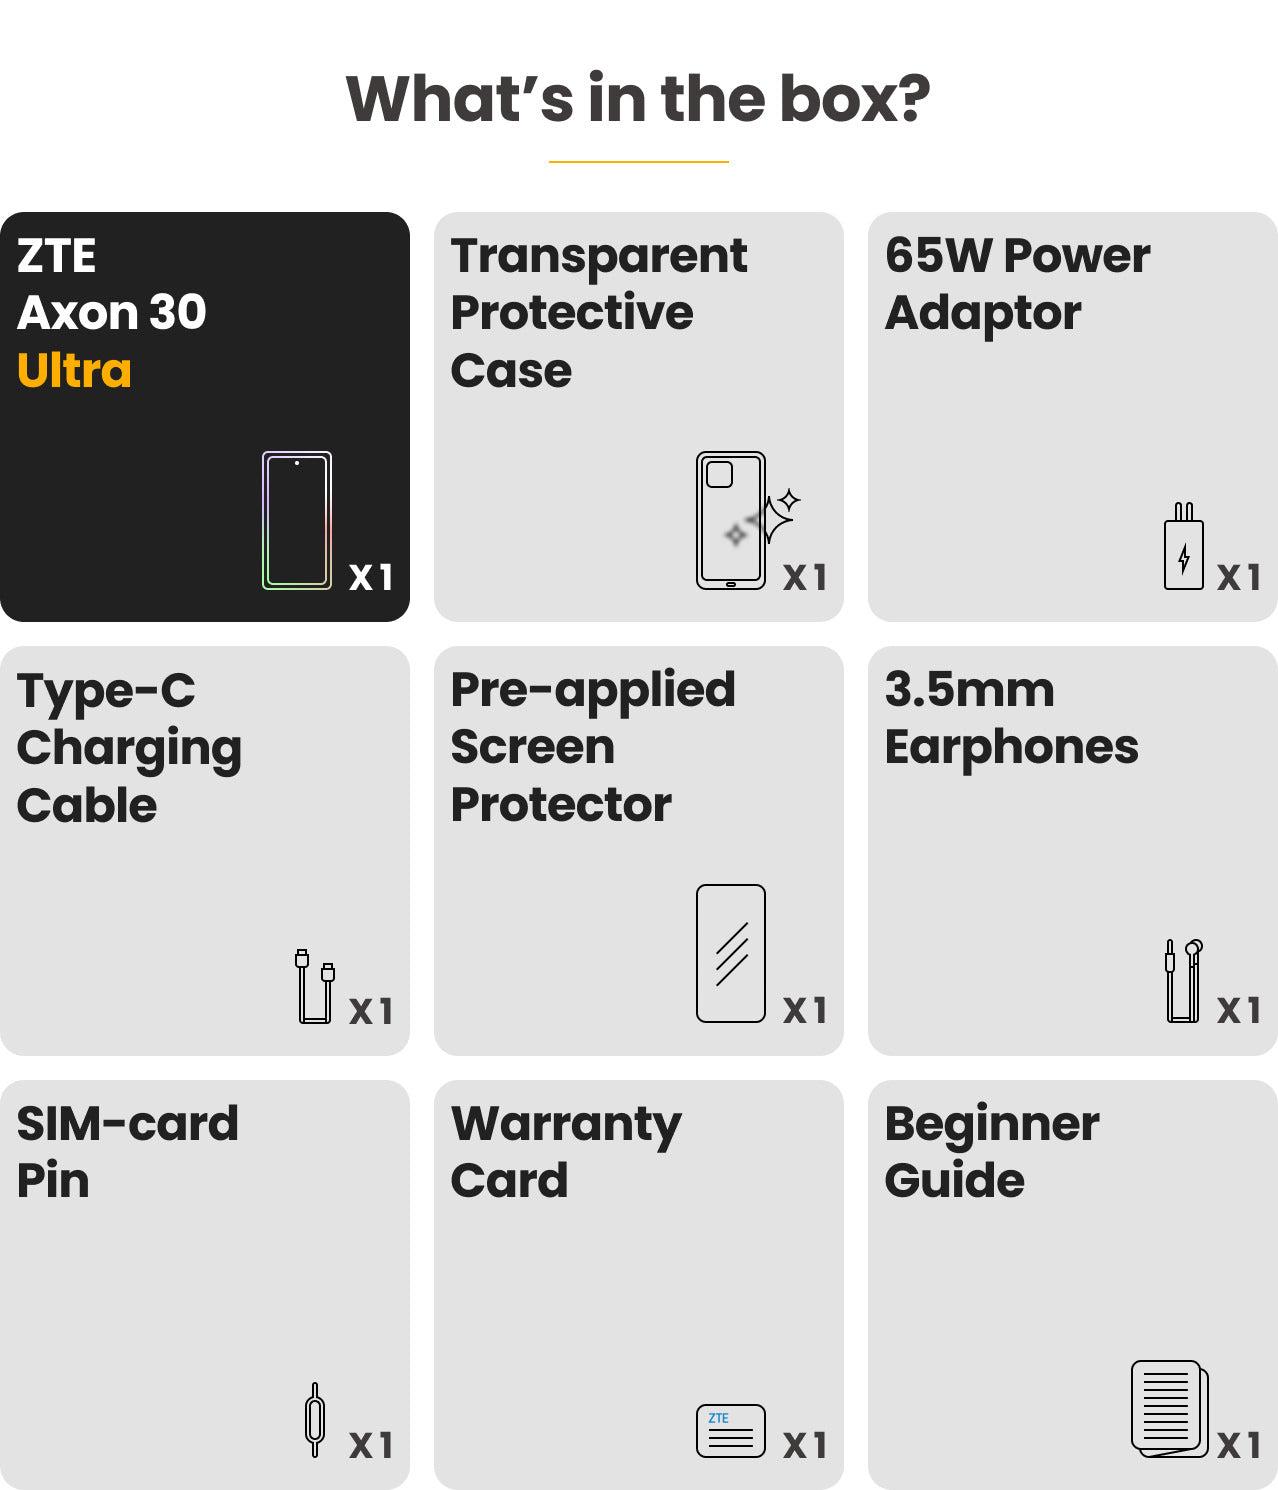 What’s in the box: 1/ One ZTE Axon 30 Ultra; 2/ One Transparent Protective Case; 3/One 65W Power Adaptor; 4/One Type-C Charging Cable; 5/ One Pre-applied Screen Protector; 6/ One  3.5mm Earphones; 7/ One SIM-card Pin; 8/ One Warranty Card; 9/ One Beginner Guide